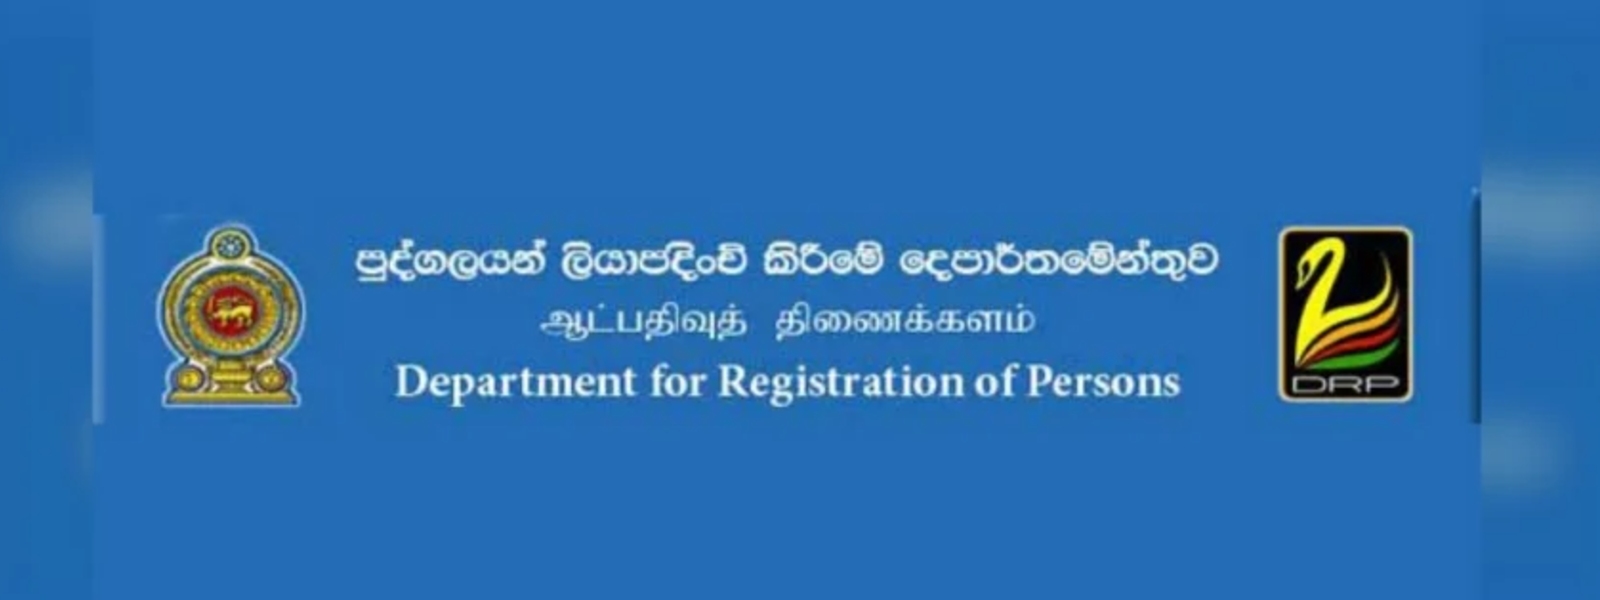 Department of Registration of Persons closed from 12th to 16th October